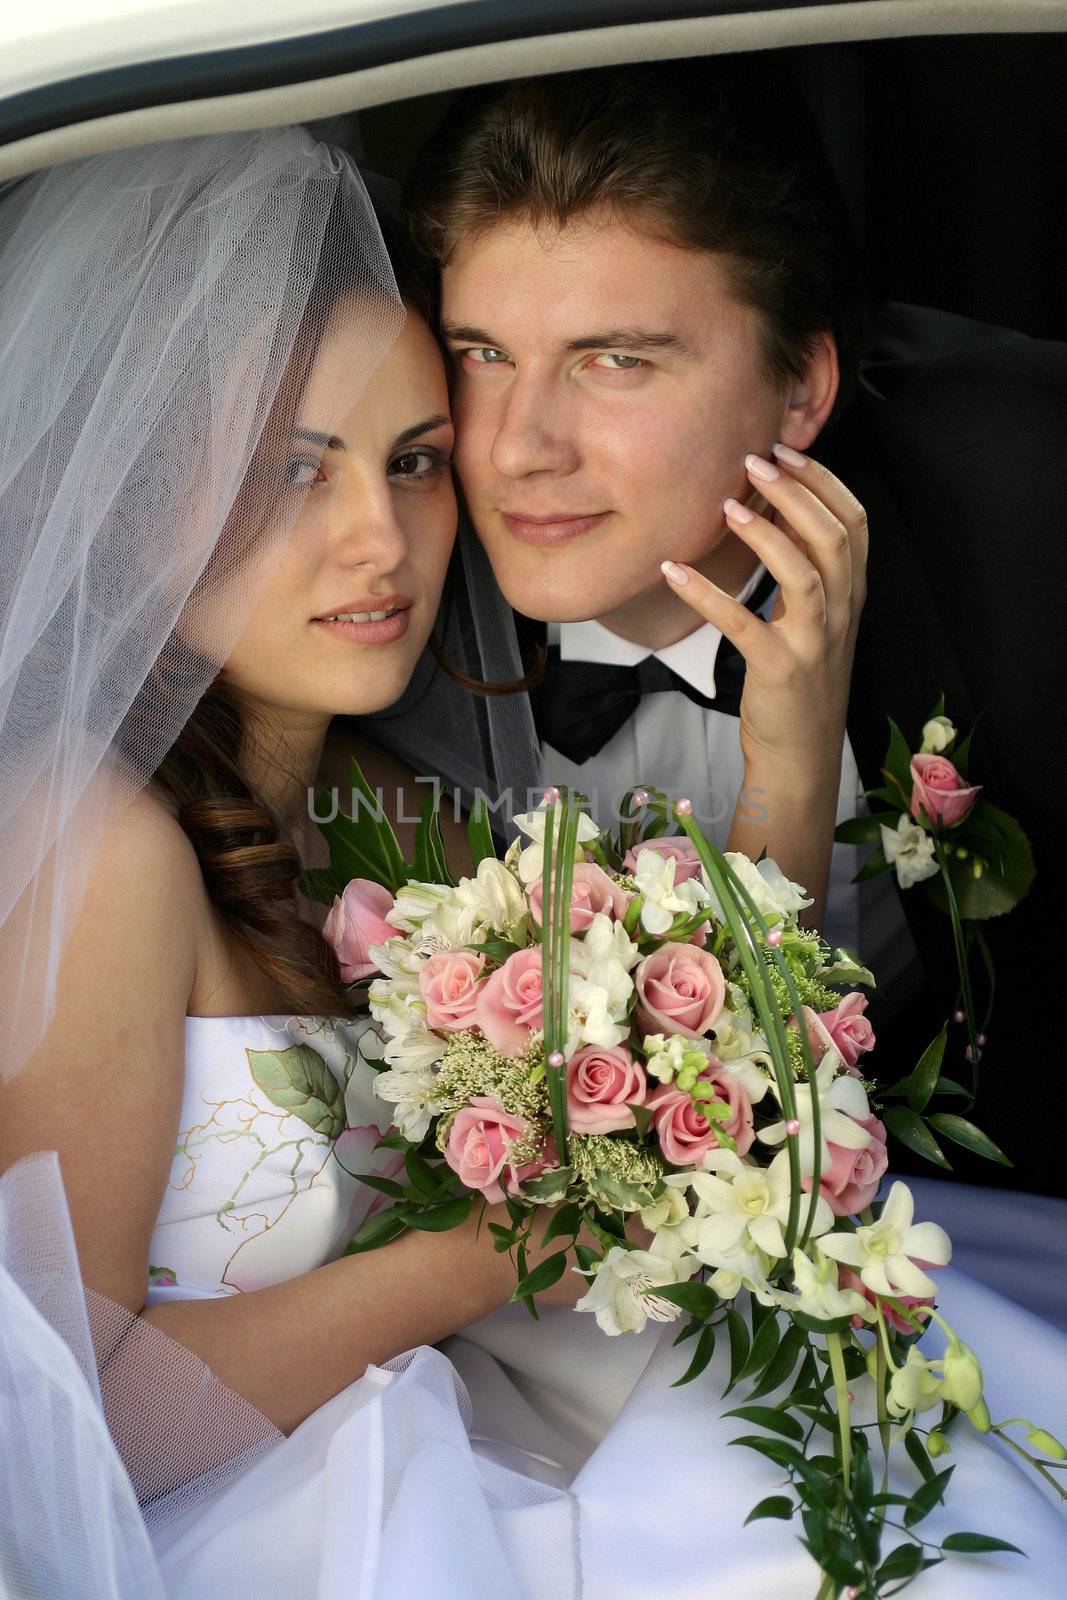 Smiling newlywed young girl in wedding car limousine doorway with bouquet of flowers.